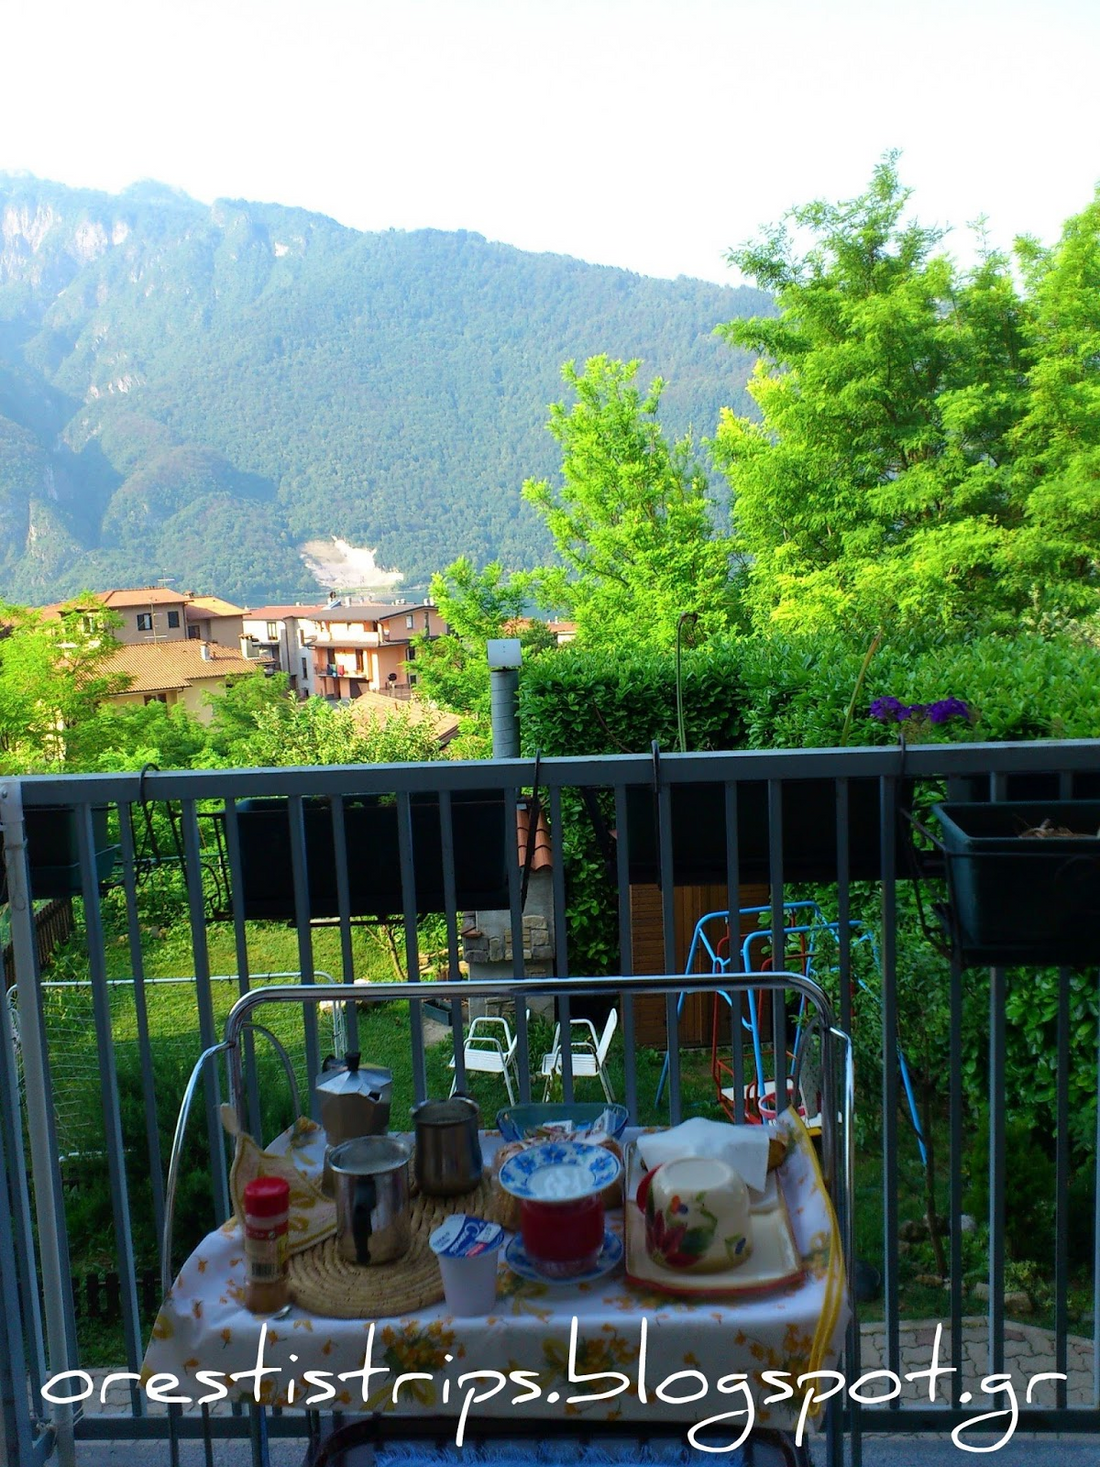 I loved my ”colazione” on that tiny balcony